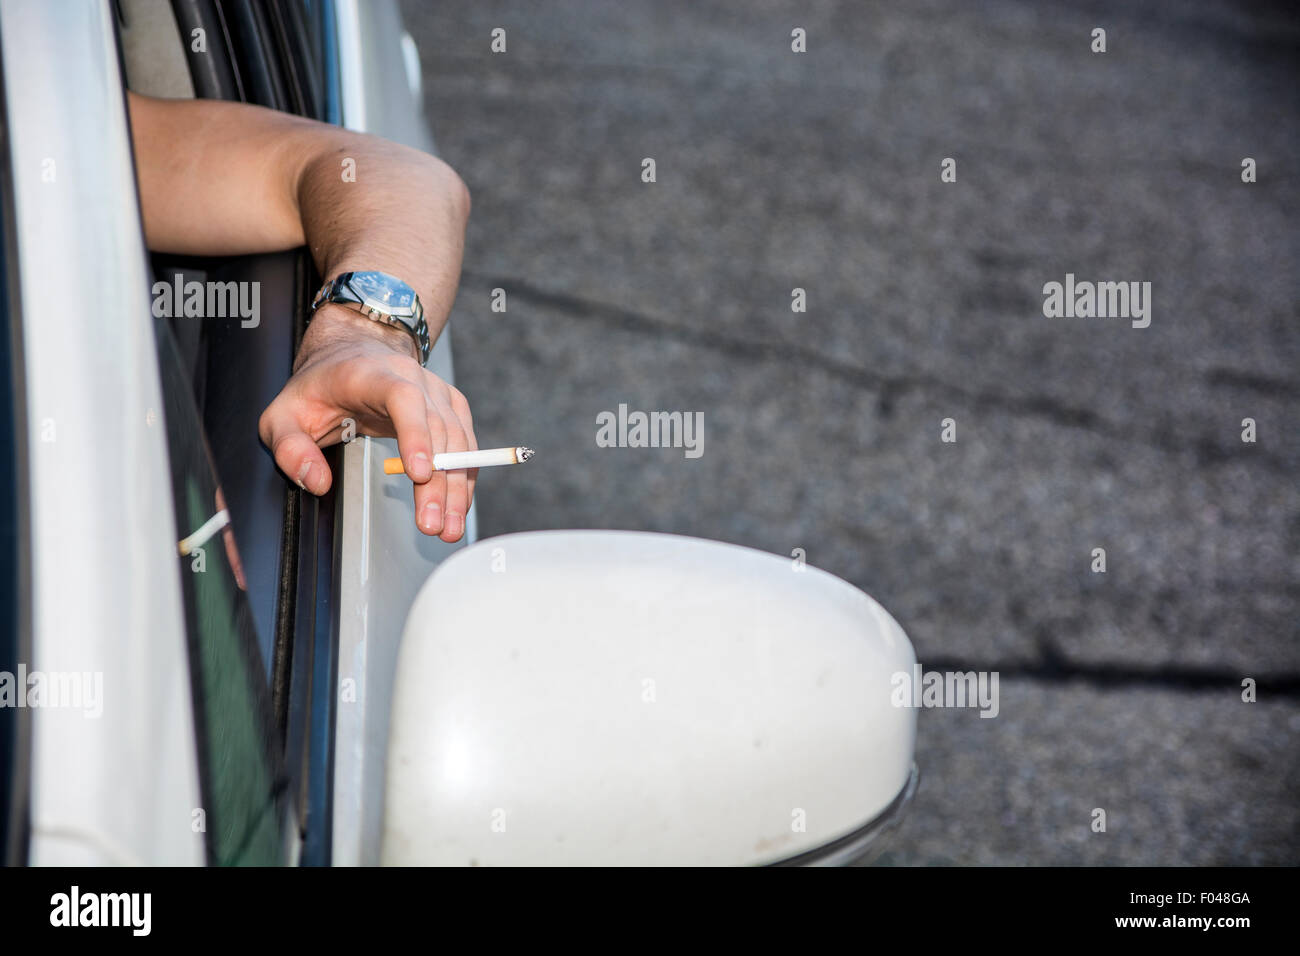 Handsome Young Man smoking cigarette while Driving a Car Stock Photo